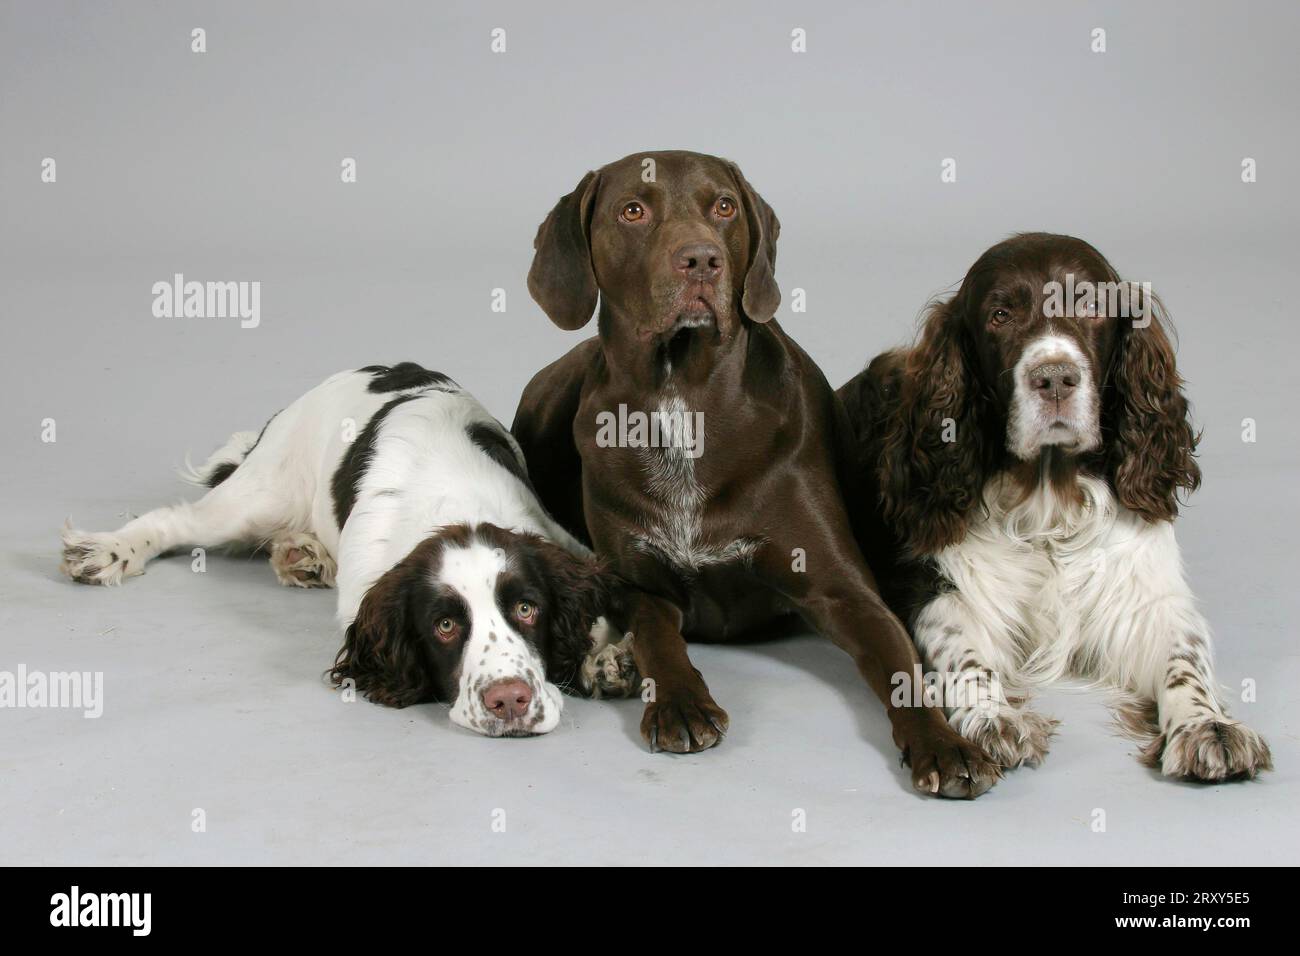 German Shorthaired Pointer and English Springer Spaniel with puppy, German Shorthaired Pointer and English Springer Spaniel with puppy, German Stock Photo